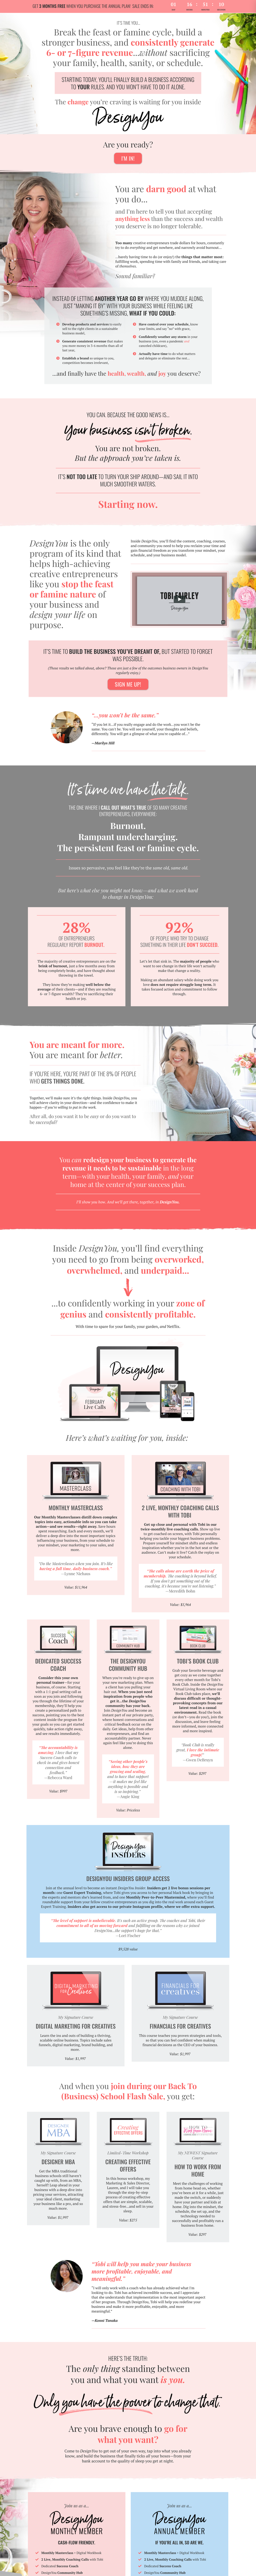 screen capture of first portion of the DesignYou sales page